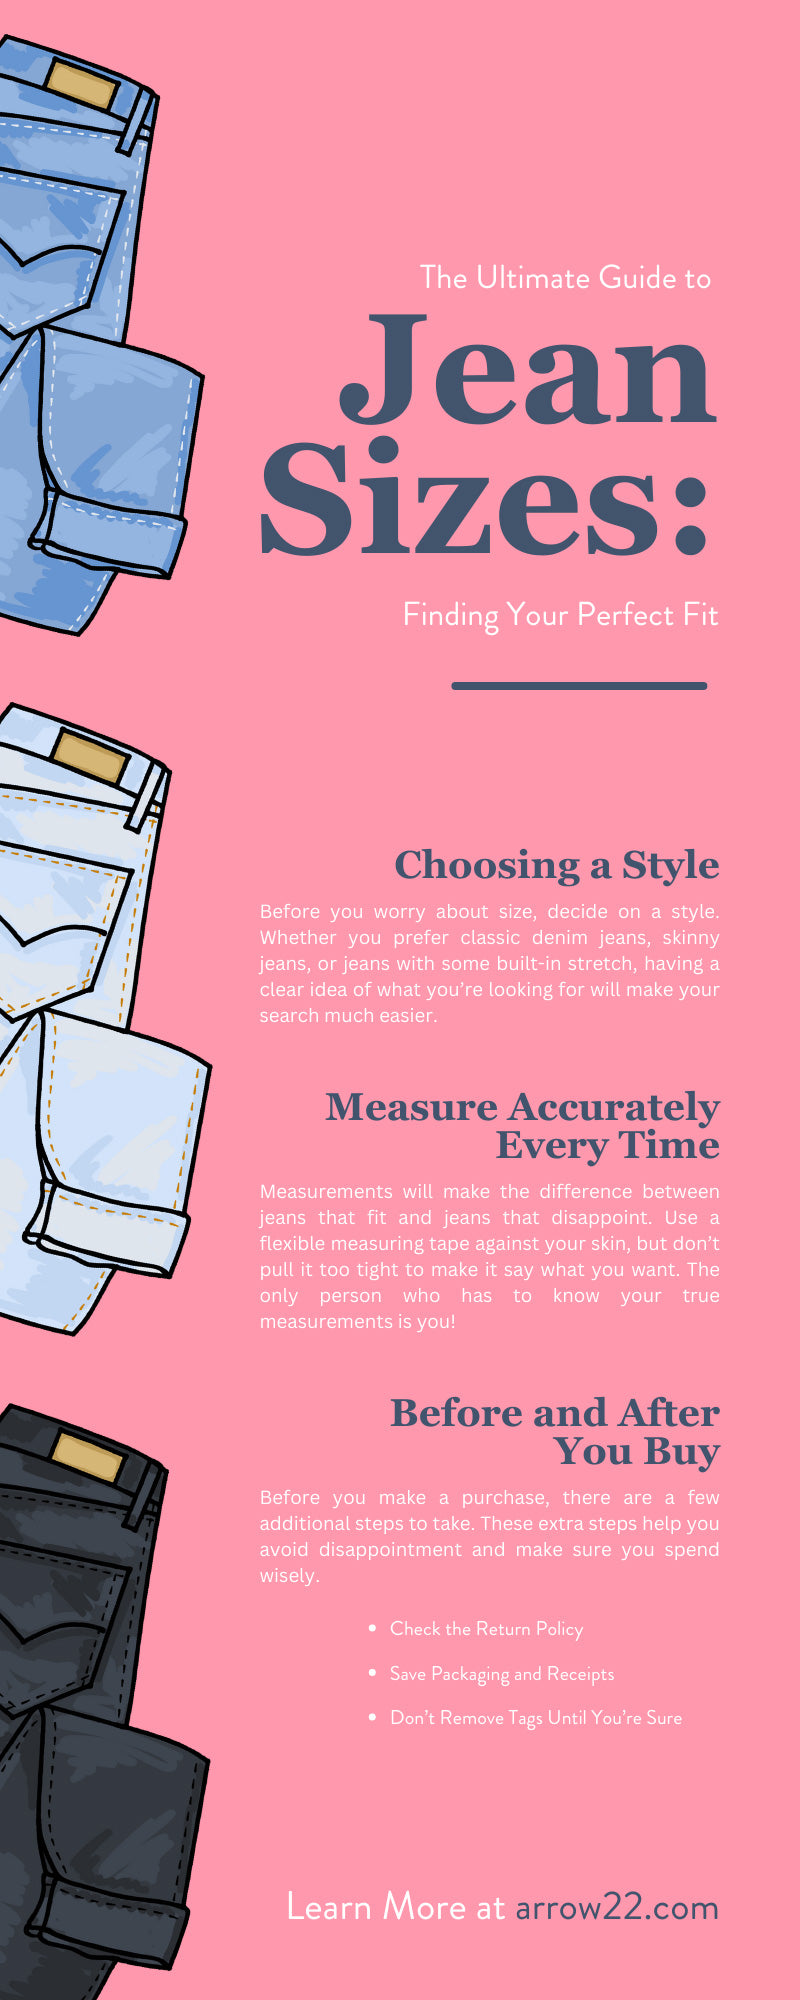 The Ultimate Guide to Jean Sizes: Finding Your Perfect Fit